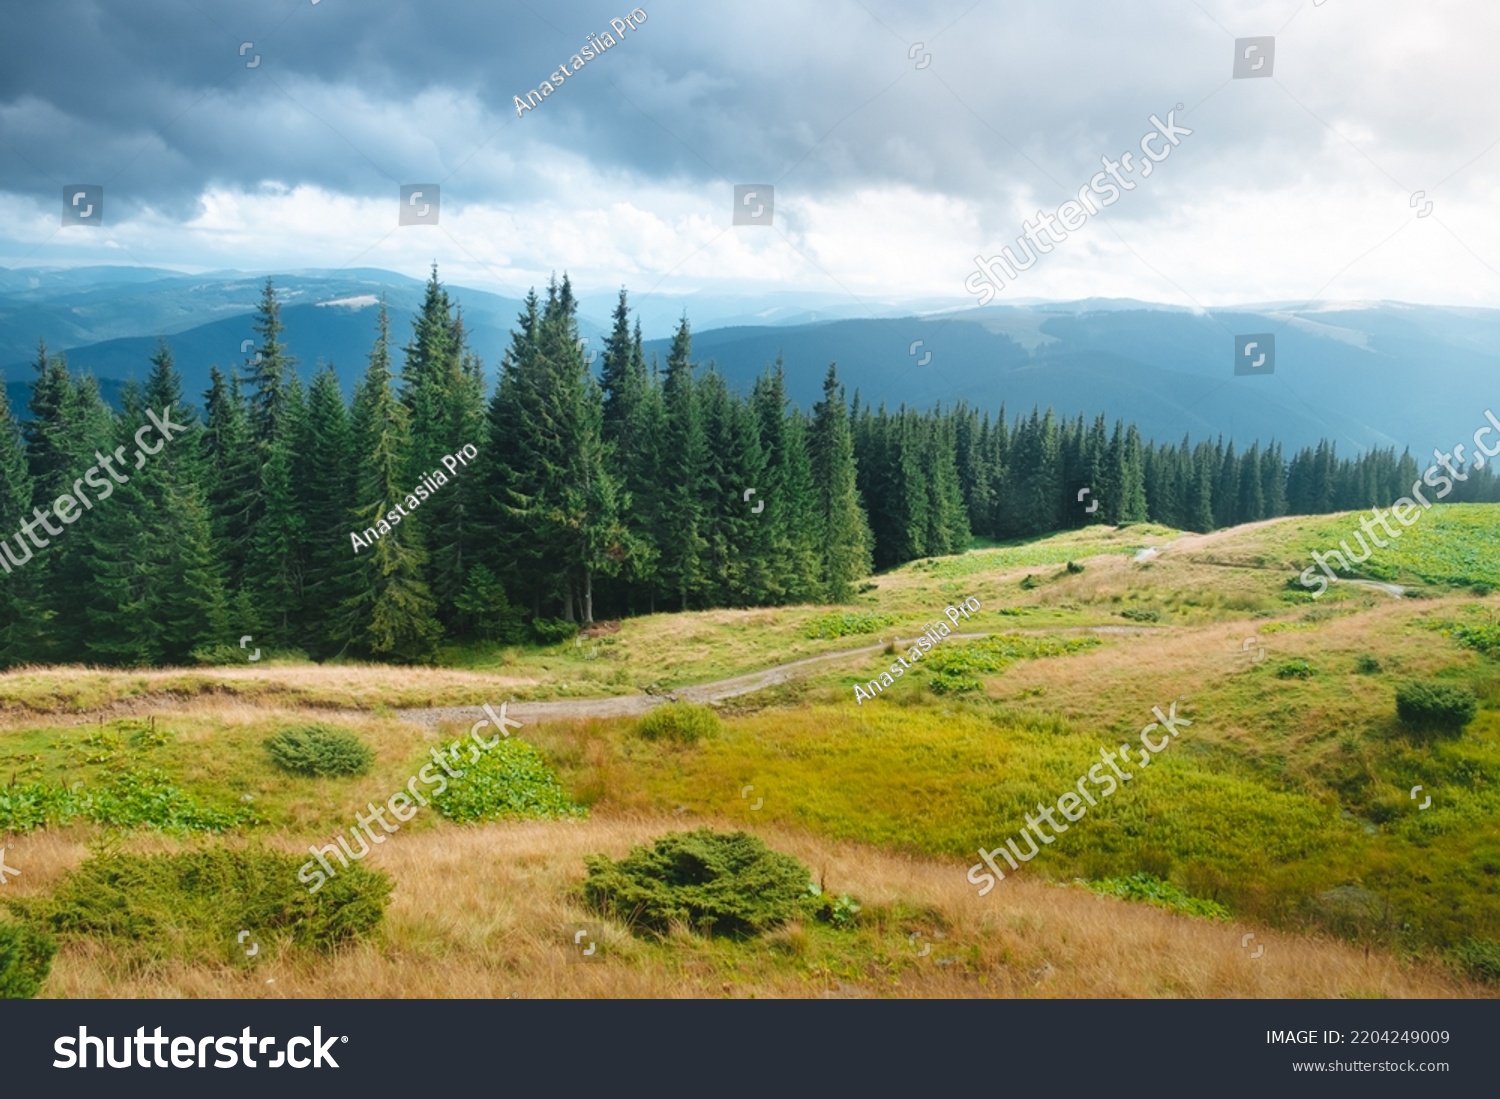 Carpathian mountains moody weather landscape. Green hill meadow, pine tree forest and cloudy sky. Amazing nature scenery in mountain valley. Beautiful nature landscape. Travel, adventure concept image #2204249009